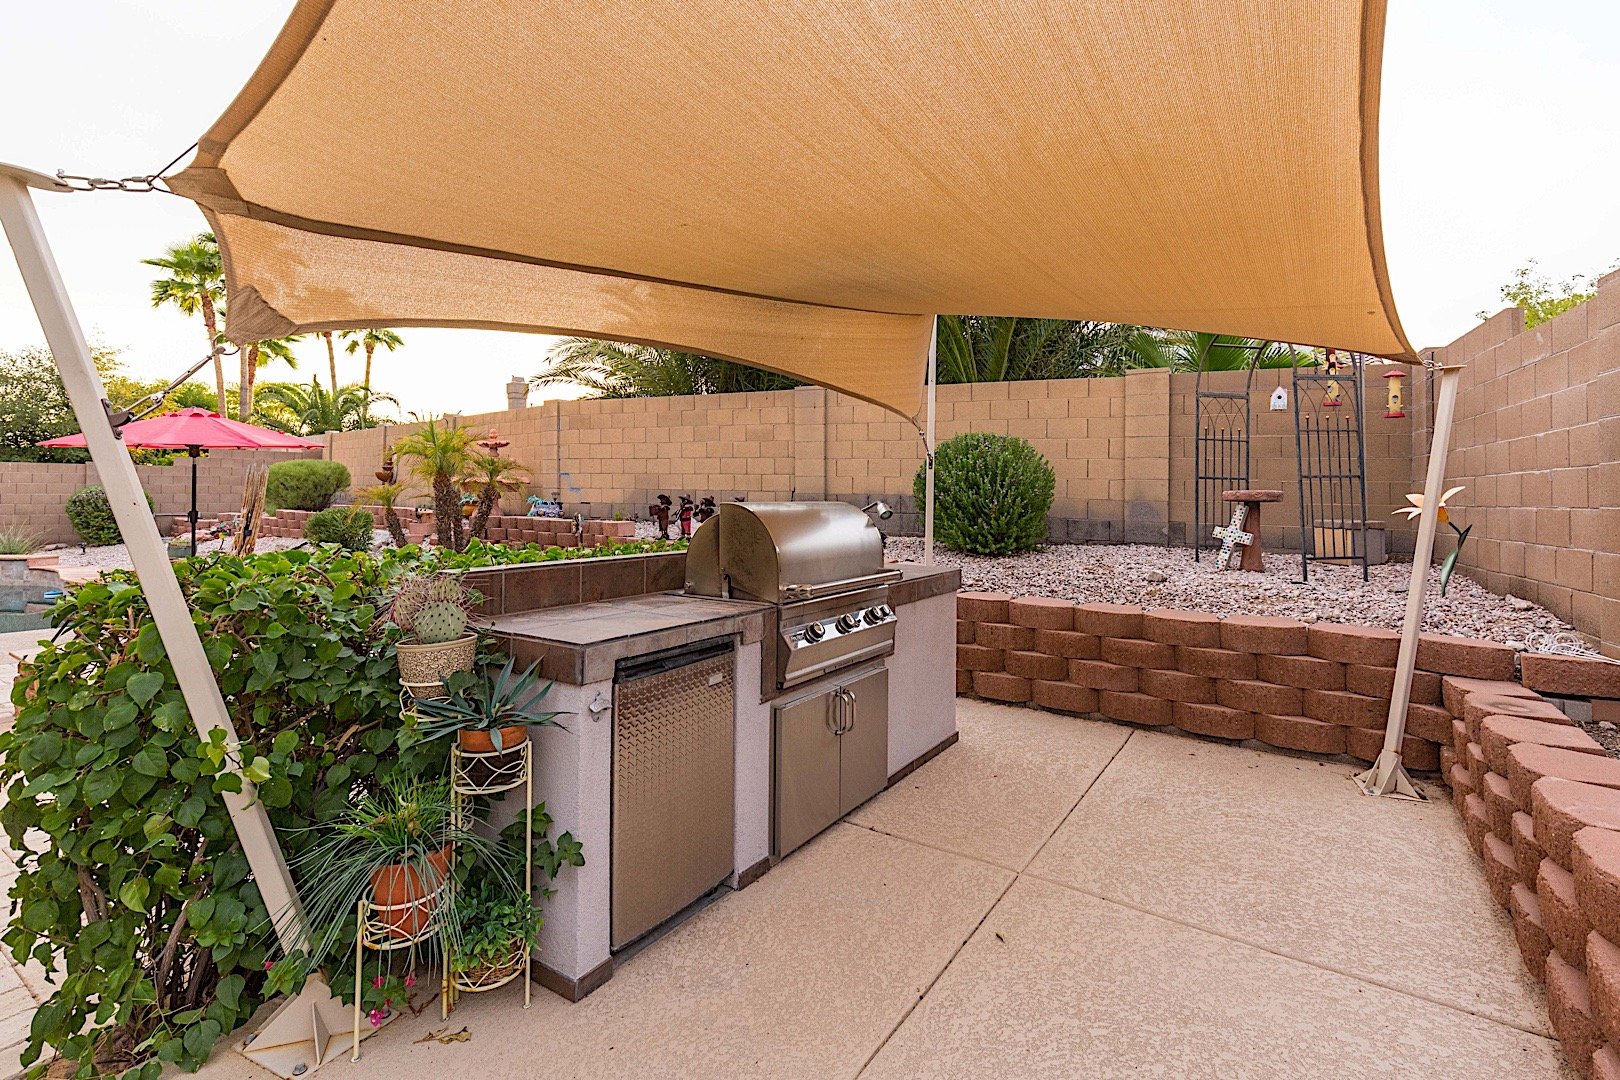 Covered BBQ Grill area